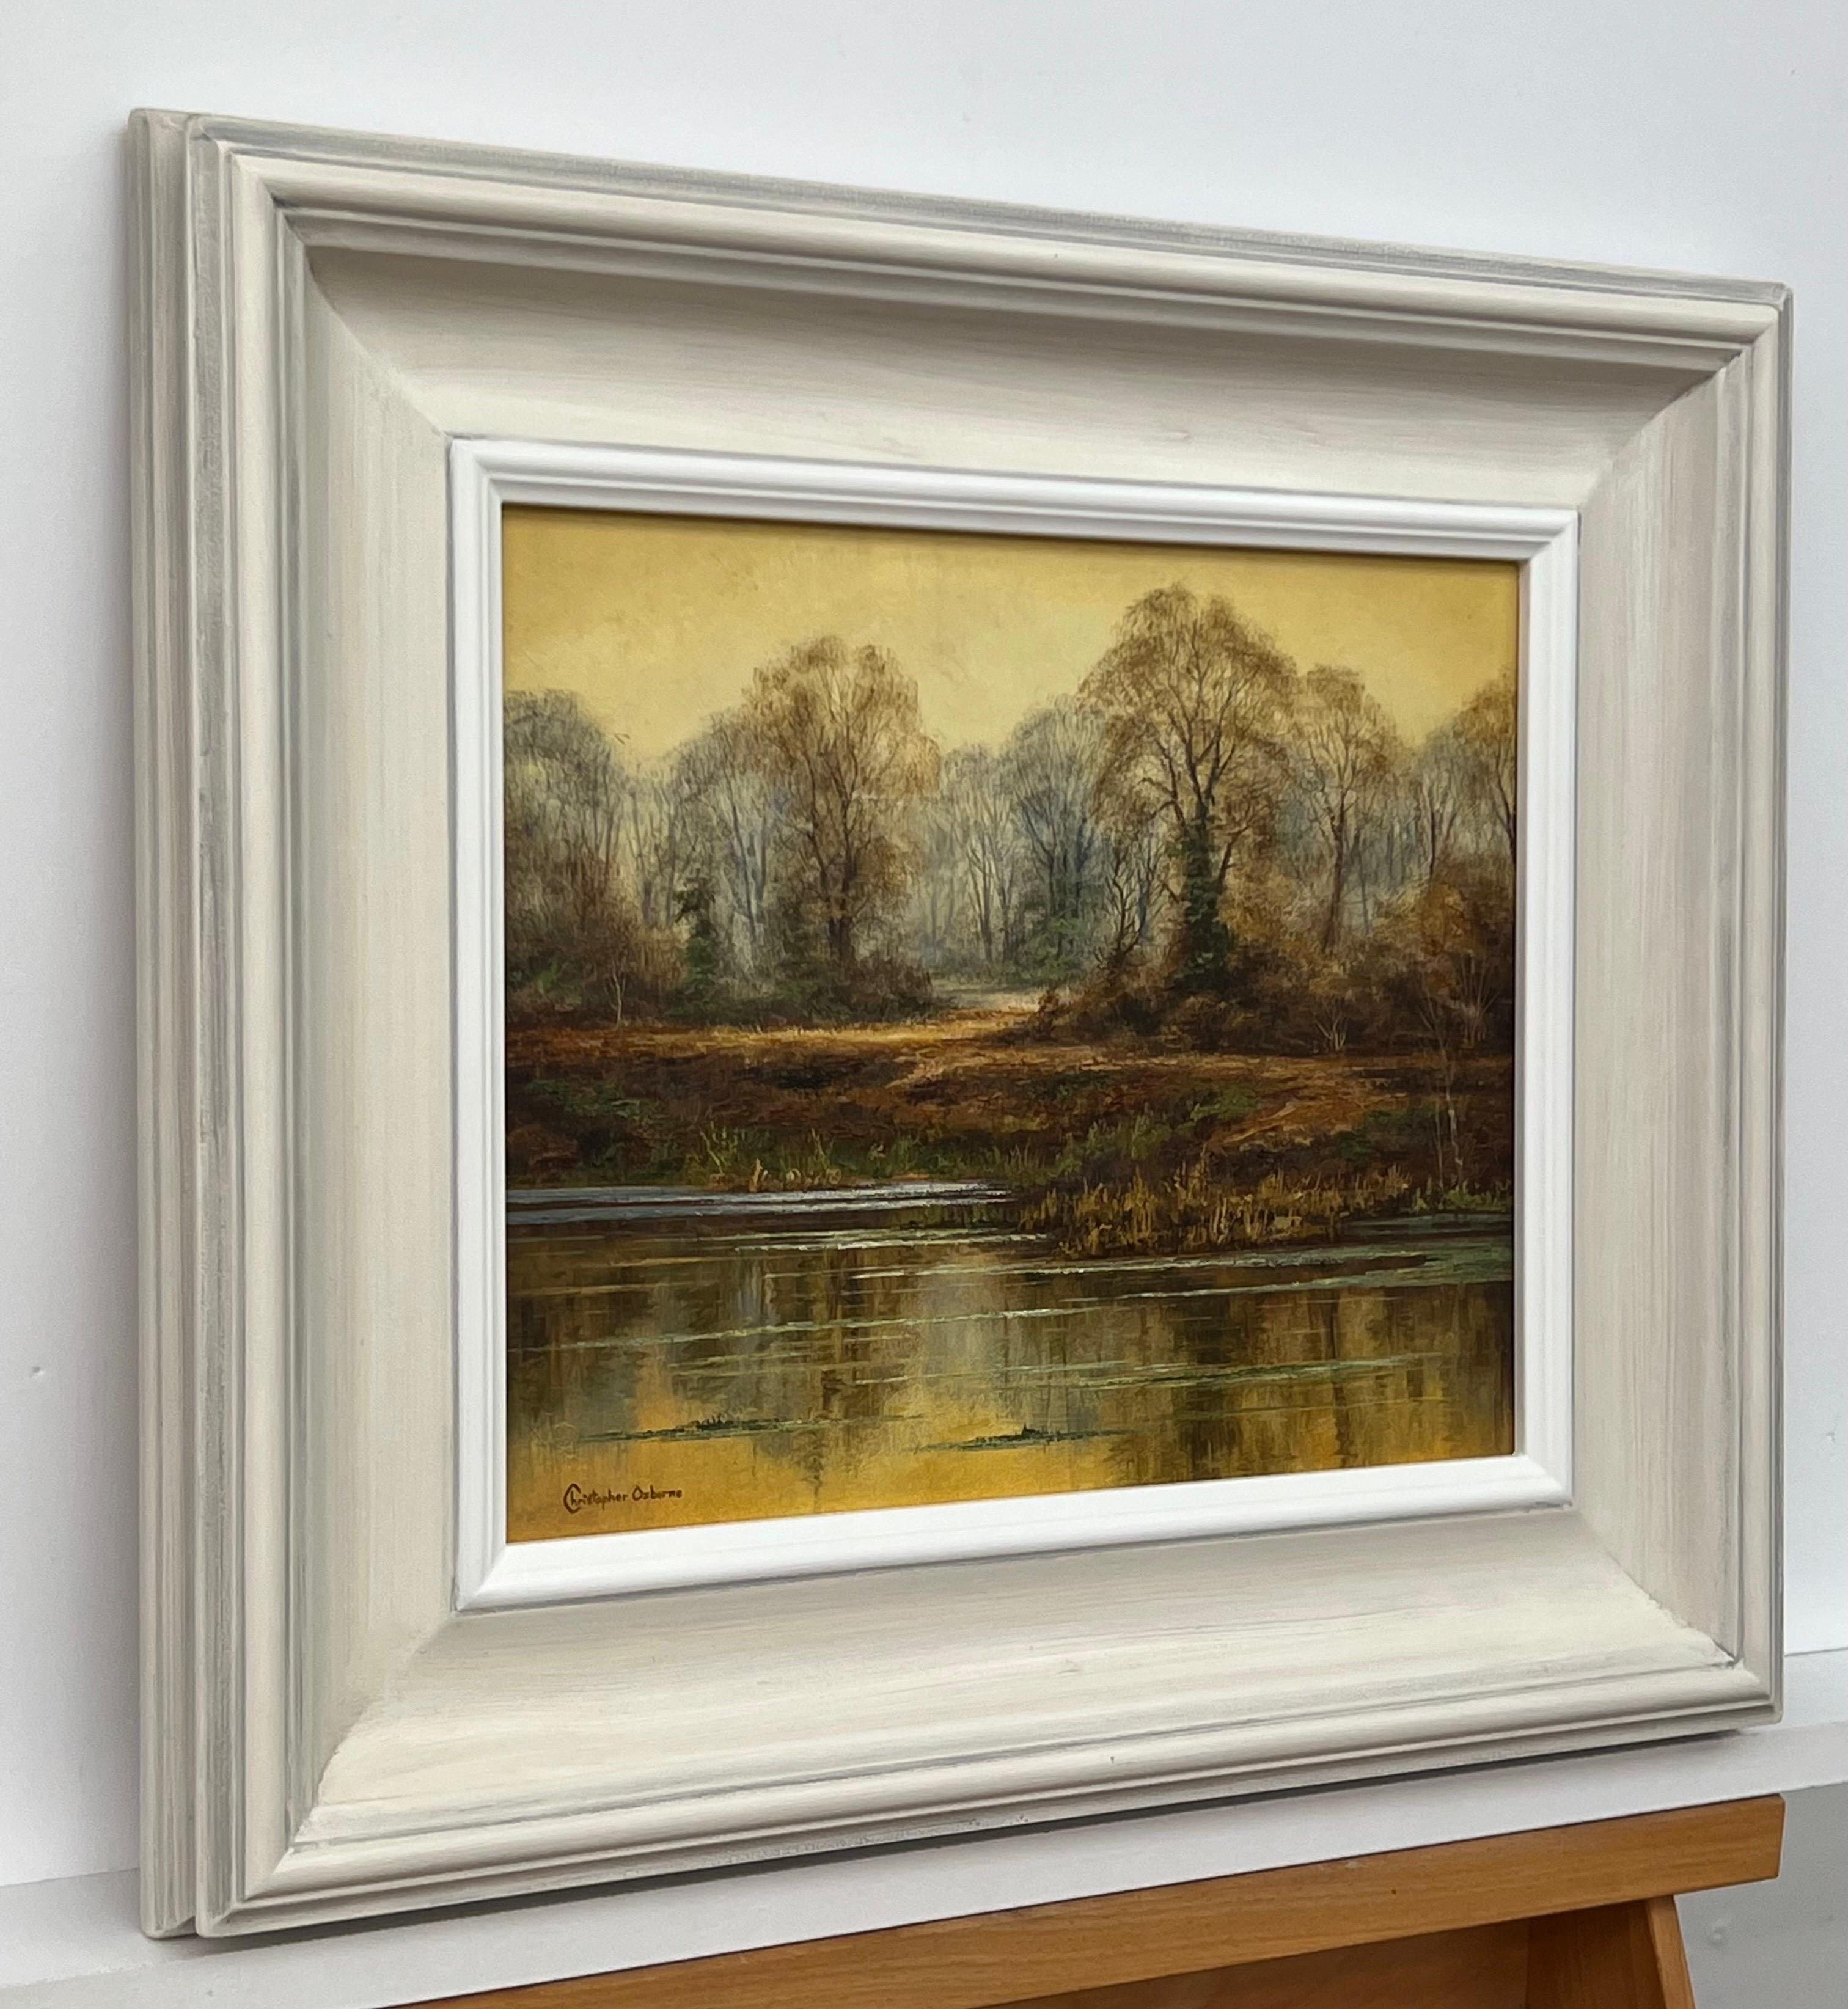 Reflections on Forest Pond in the English Countryside with Warm Yellows & Browns - Photorealist Painting by Christopher Osborne